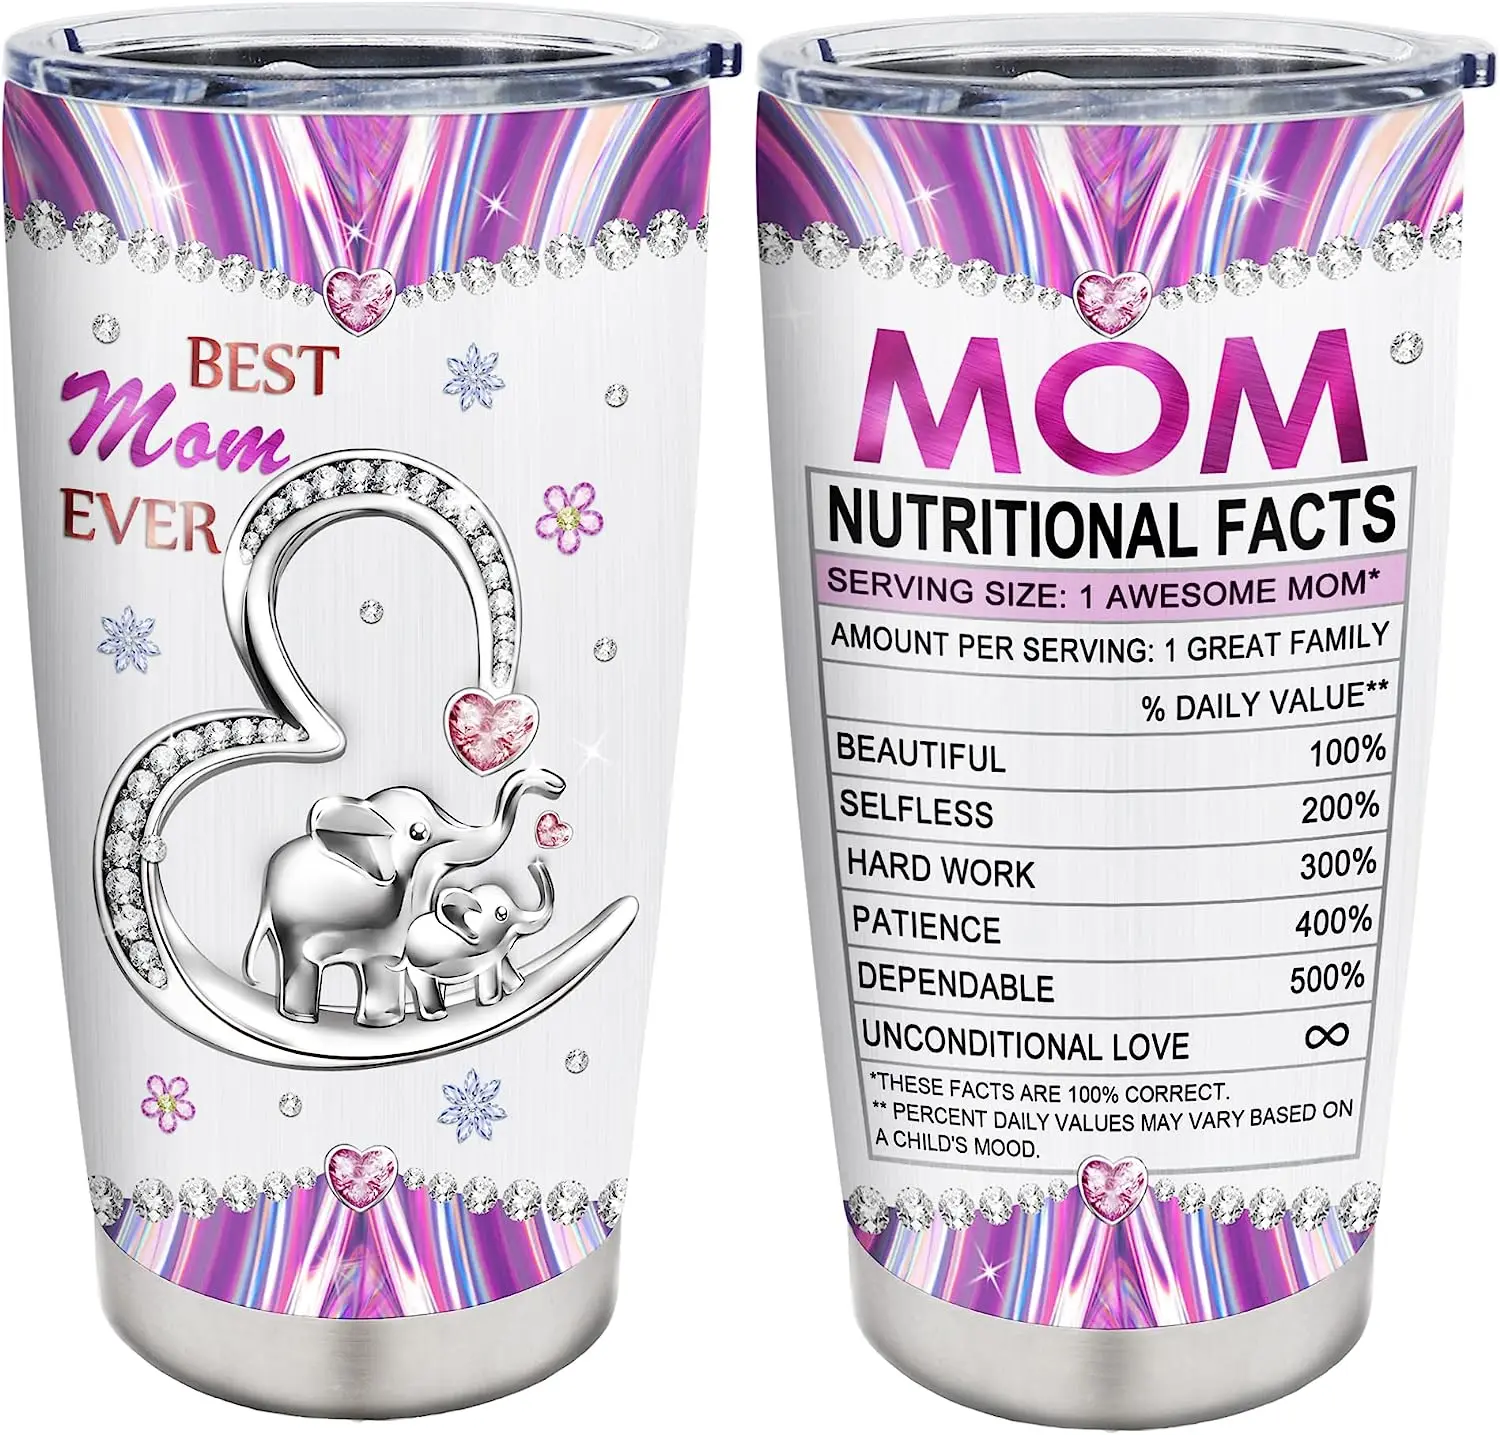 https://ae01.alicdn.com/kf/S6511fbfd500847a68d6d209d1f4f5c3bl/Gifts-for-Mom-Mom-Tumbler-Cup-with-Lid-20-Oz-Moms-Day-Gift-Flower-Stainless-Steel.jpg